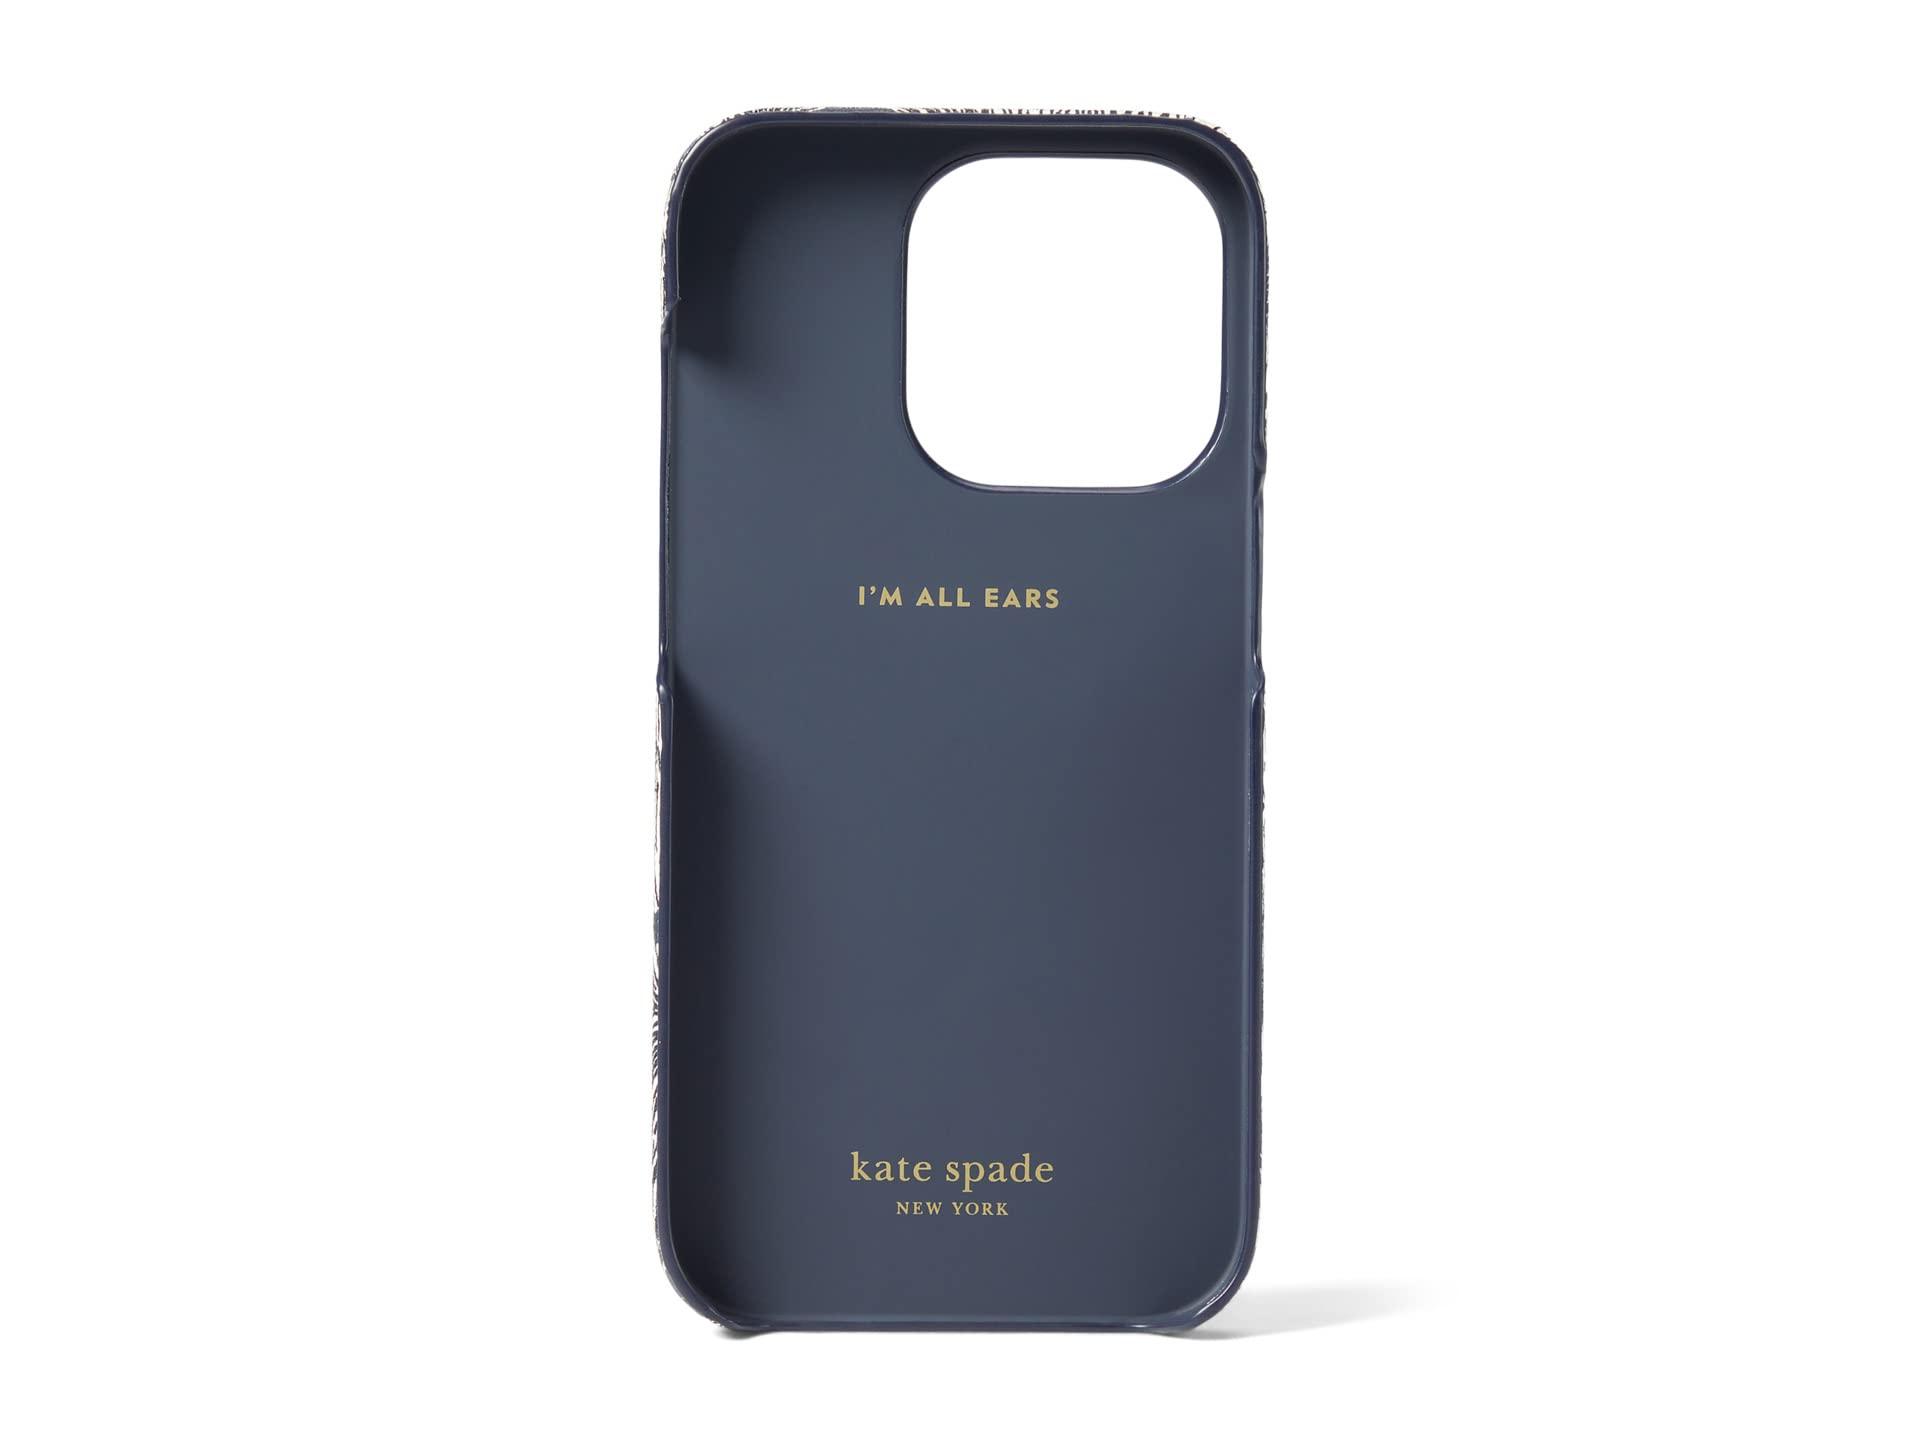 Kate Spade Morgan Showdogs Printed Saffiano Leather Wrapped Iphone in Black  | Lyst